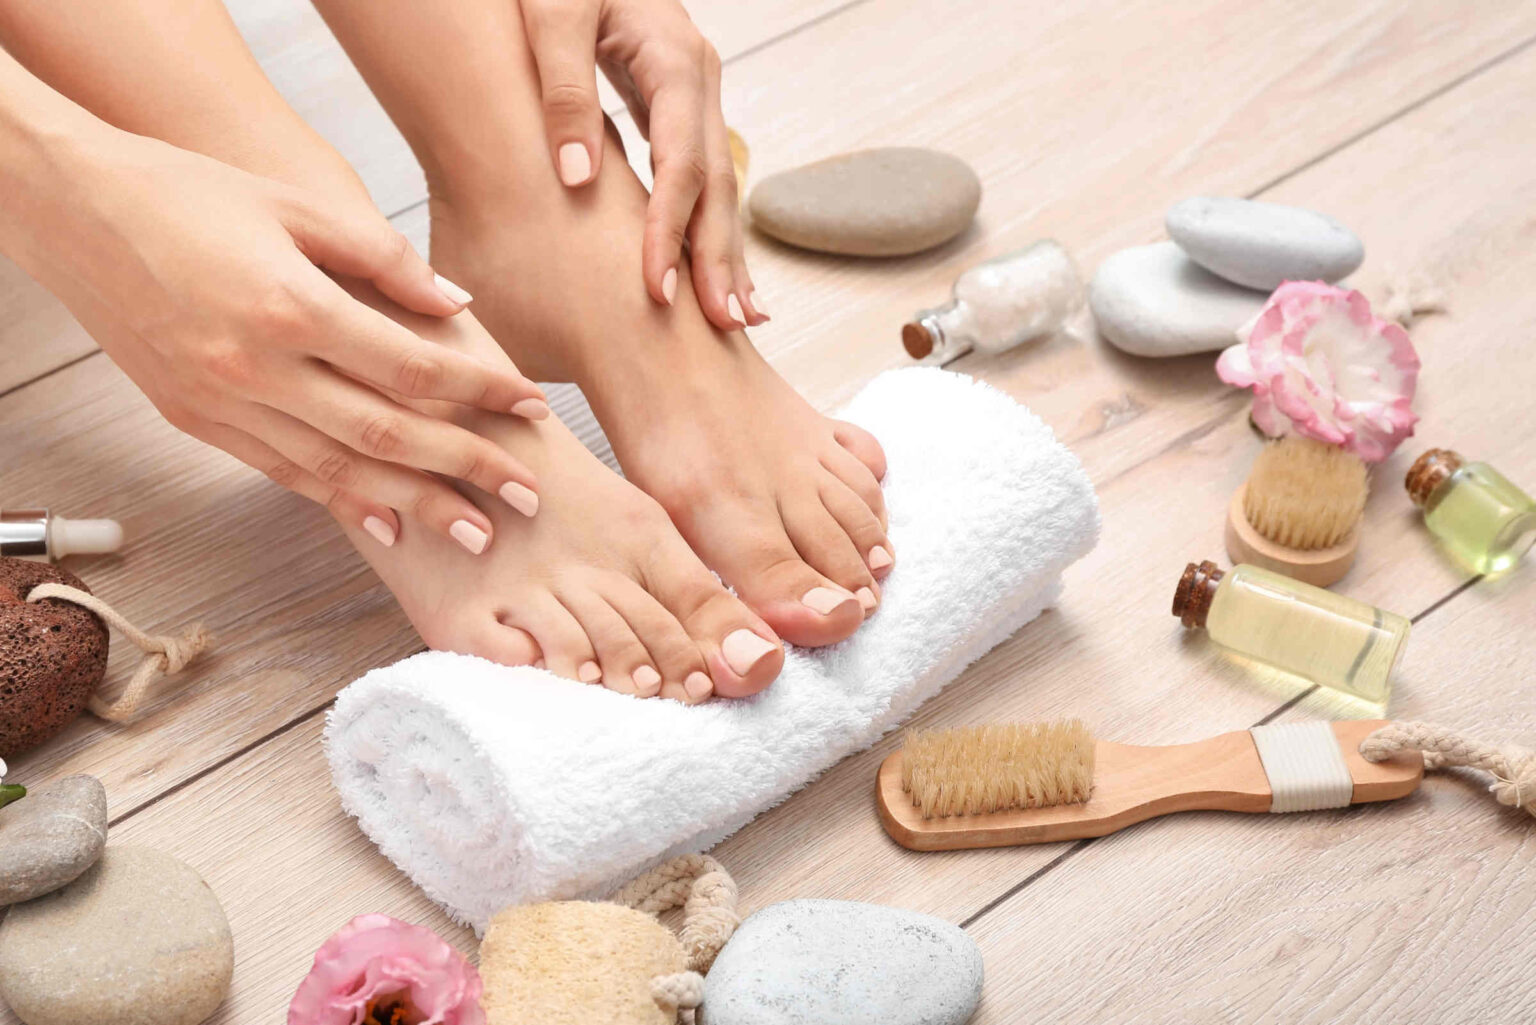 Whether you're getting a pedicure, manicure, or both, here's what you need to know before going into your next nail appointment!